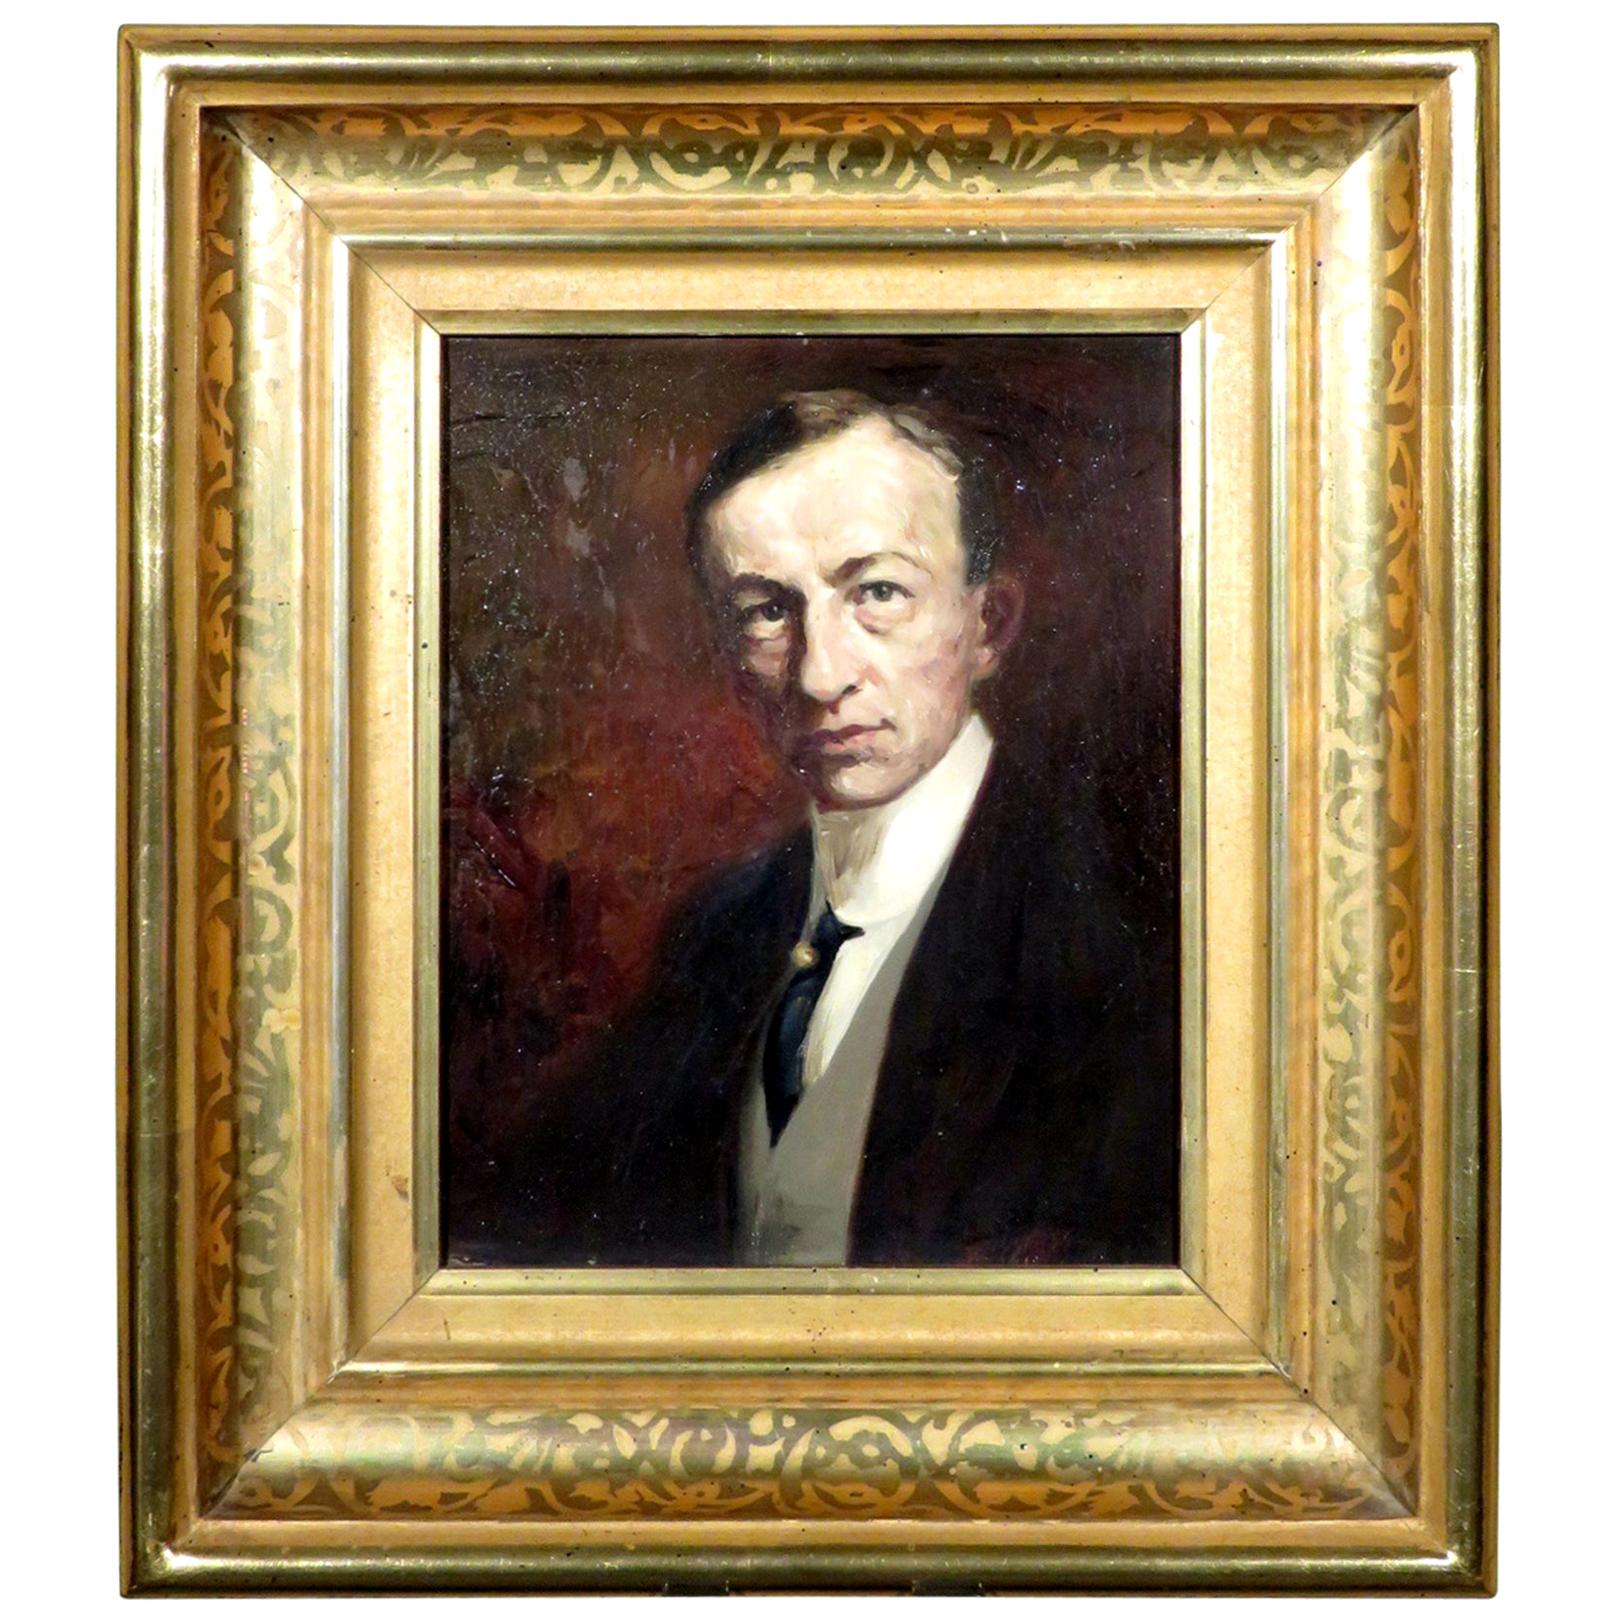 A striking early 20th century impressionist portrait of a gentleman, executed with oil on cardboard & laid down on artist board, set within a very fine water gilded frame with burnished & matte highlights. 
Panel dimensions, 9.5” h x 7.75” w, frame